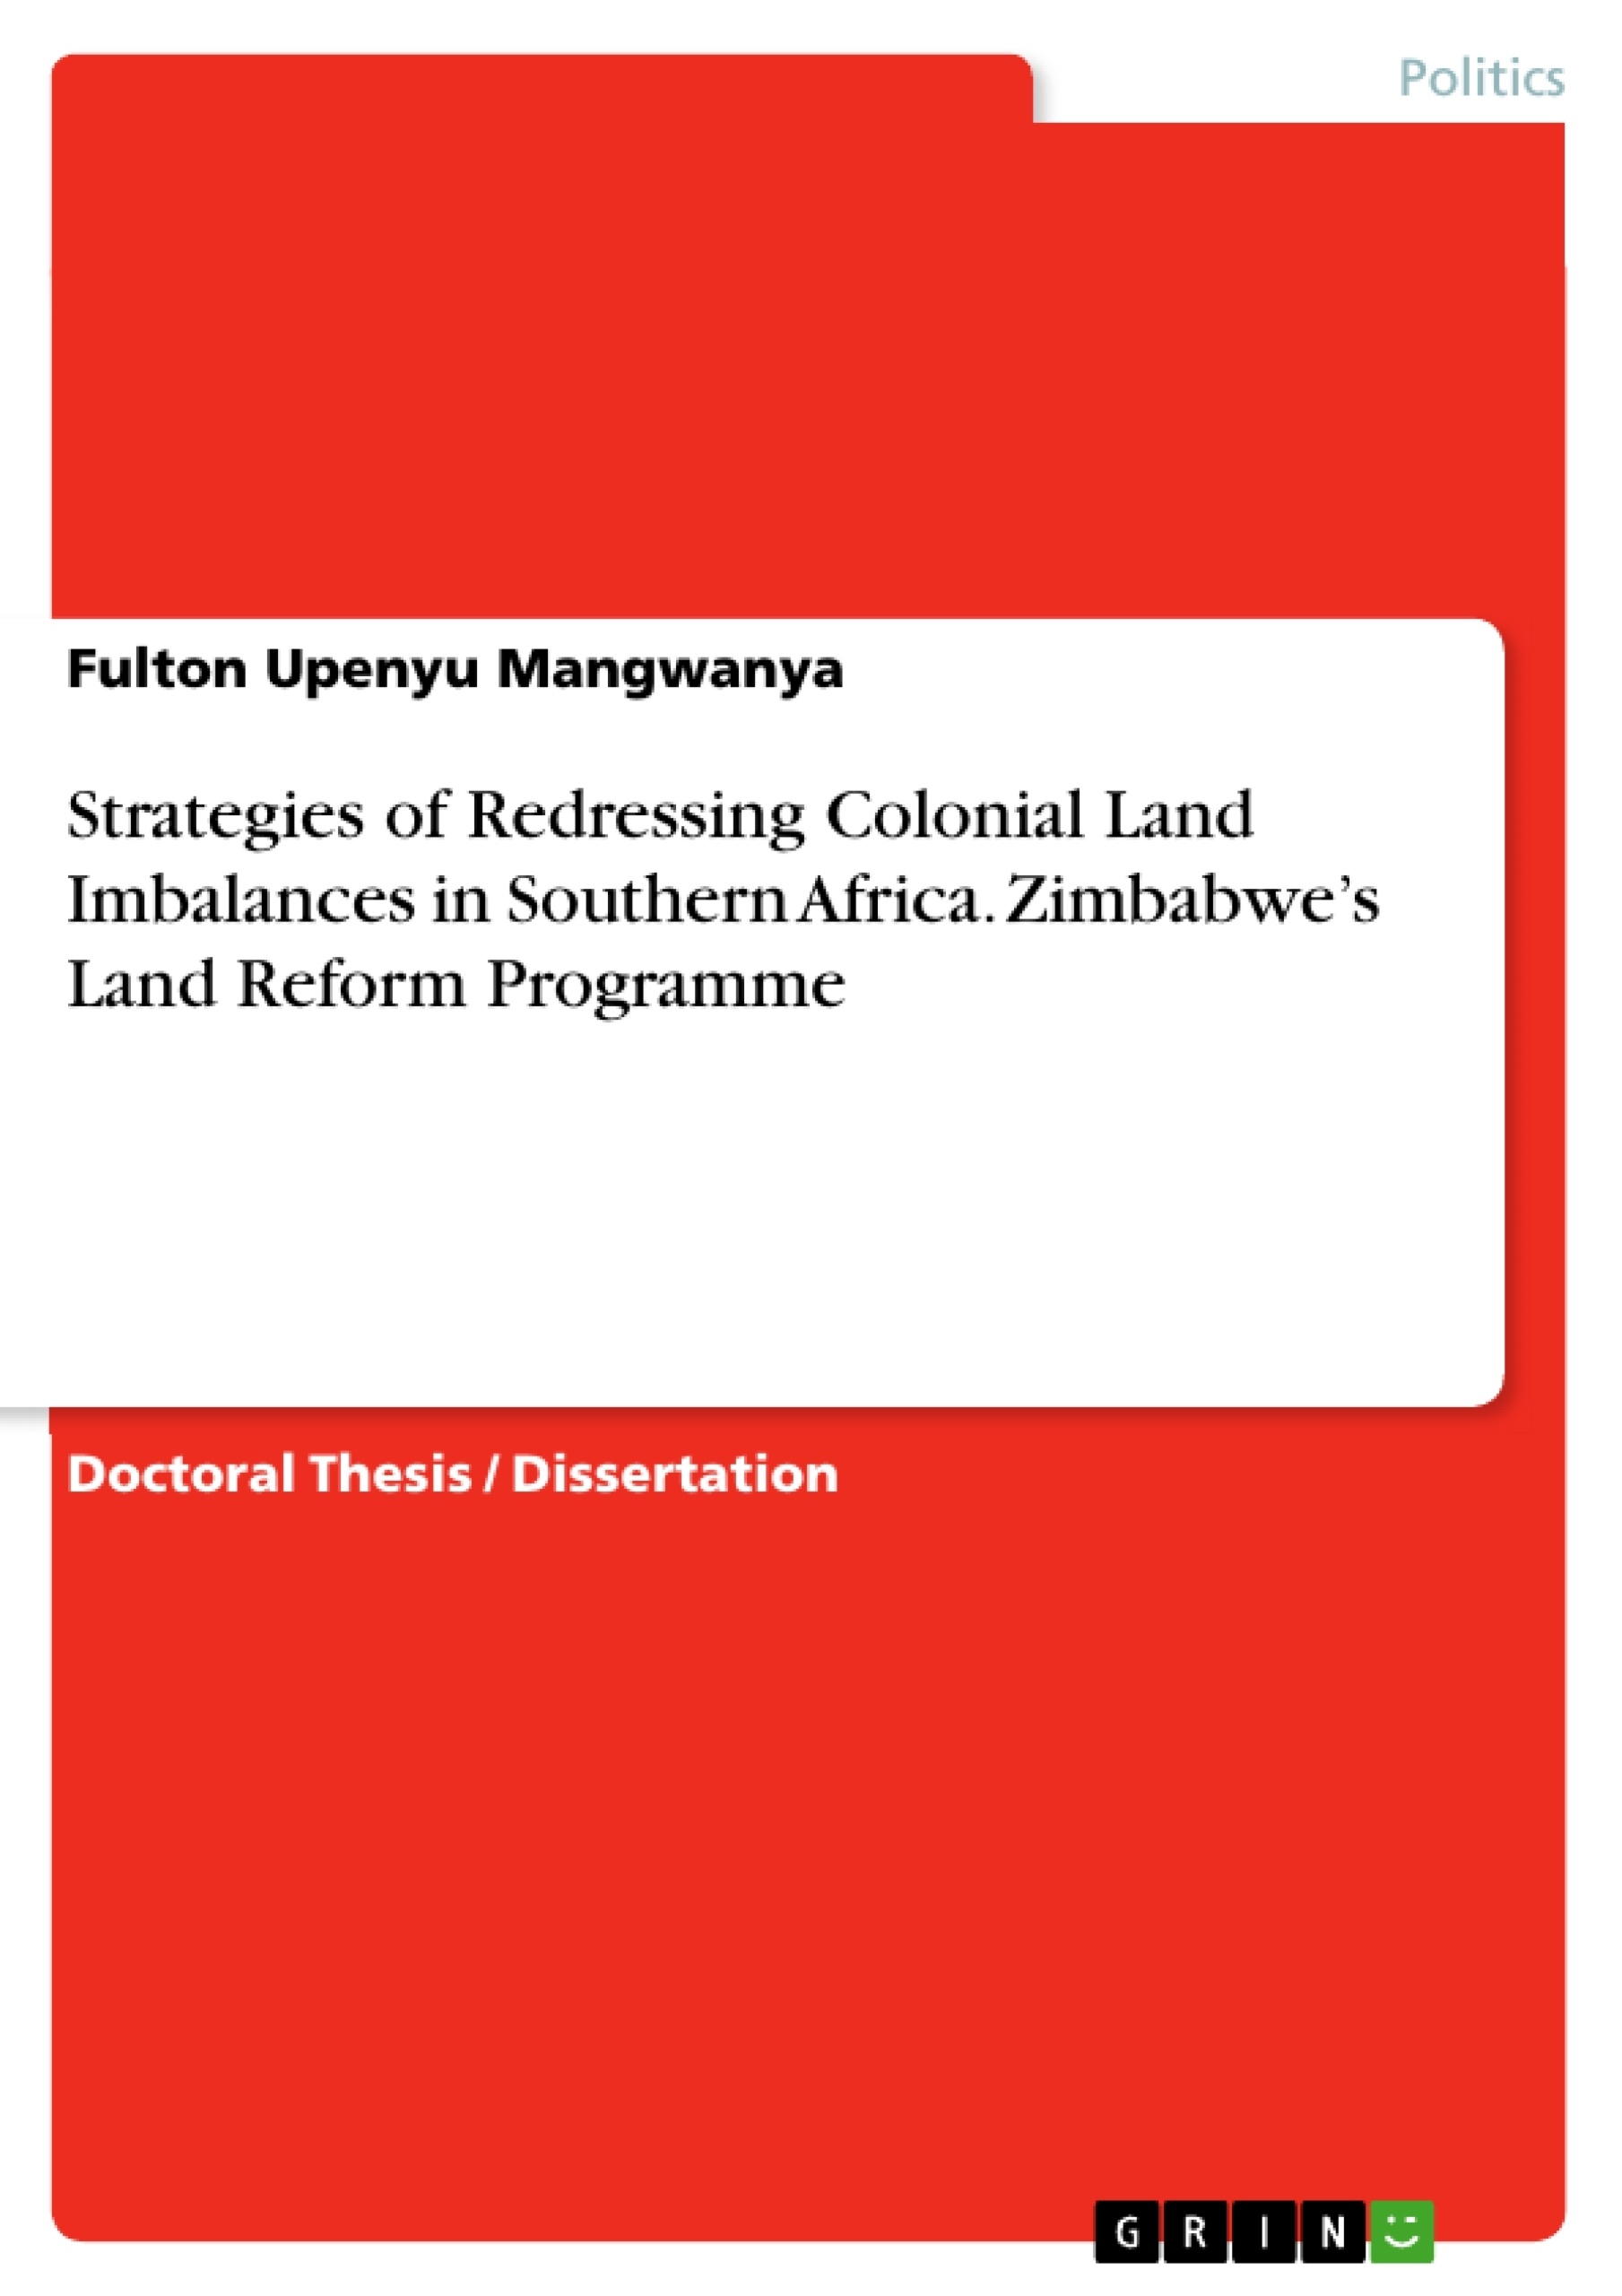 Title: Strategies of Redressing Colonial Land Imbalances in Southern Africa. Zimbabwe’s Land Reform Programme